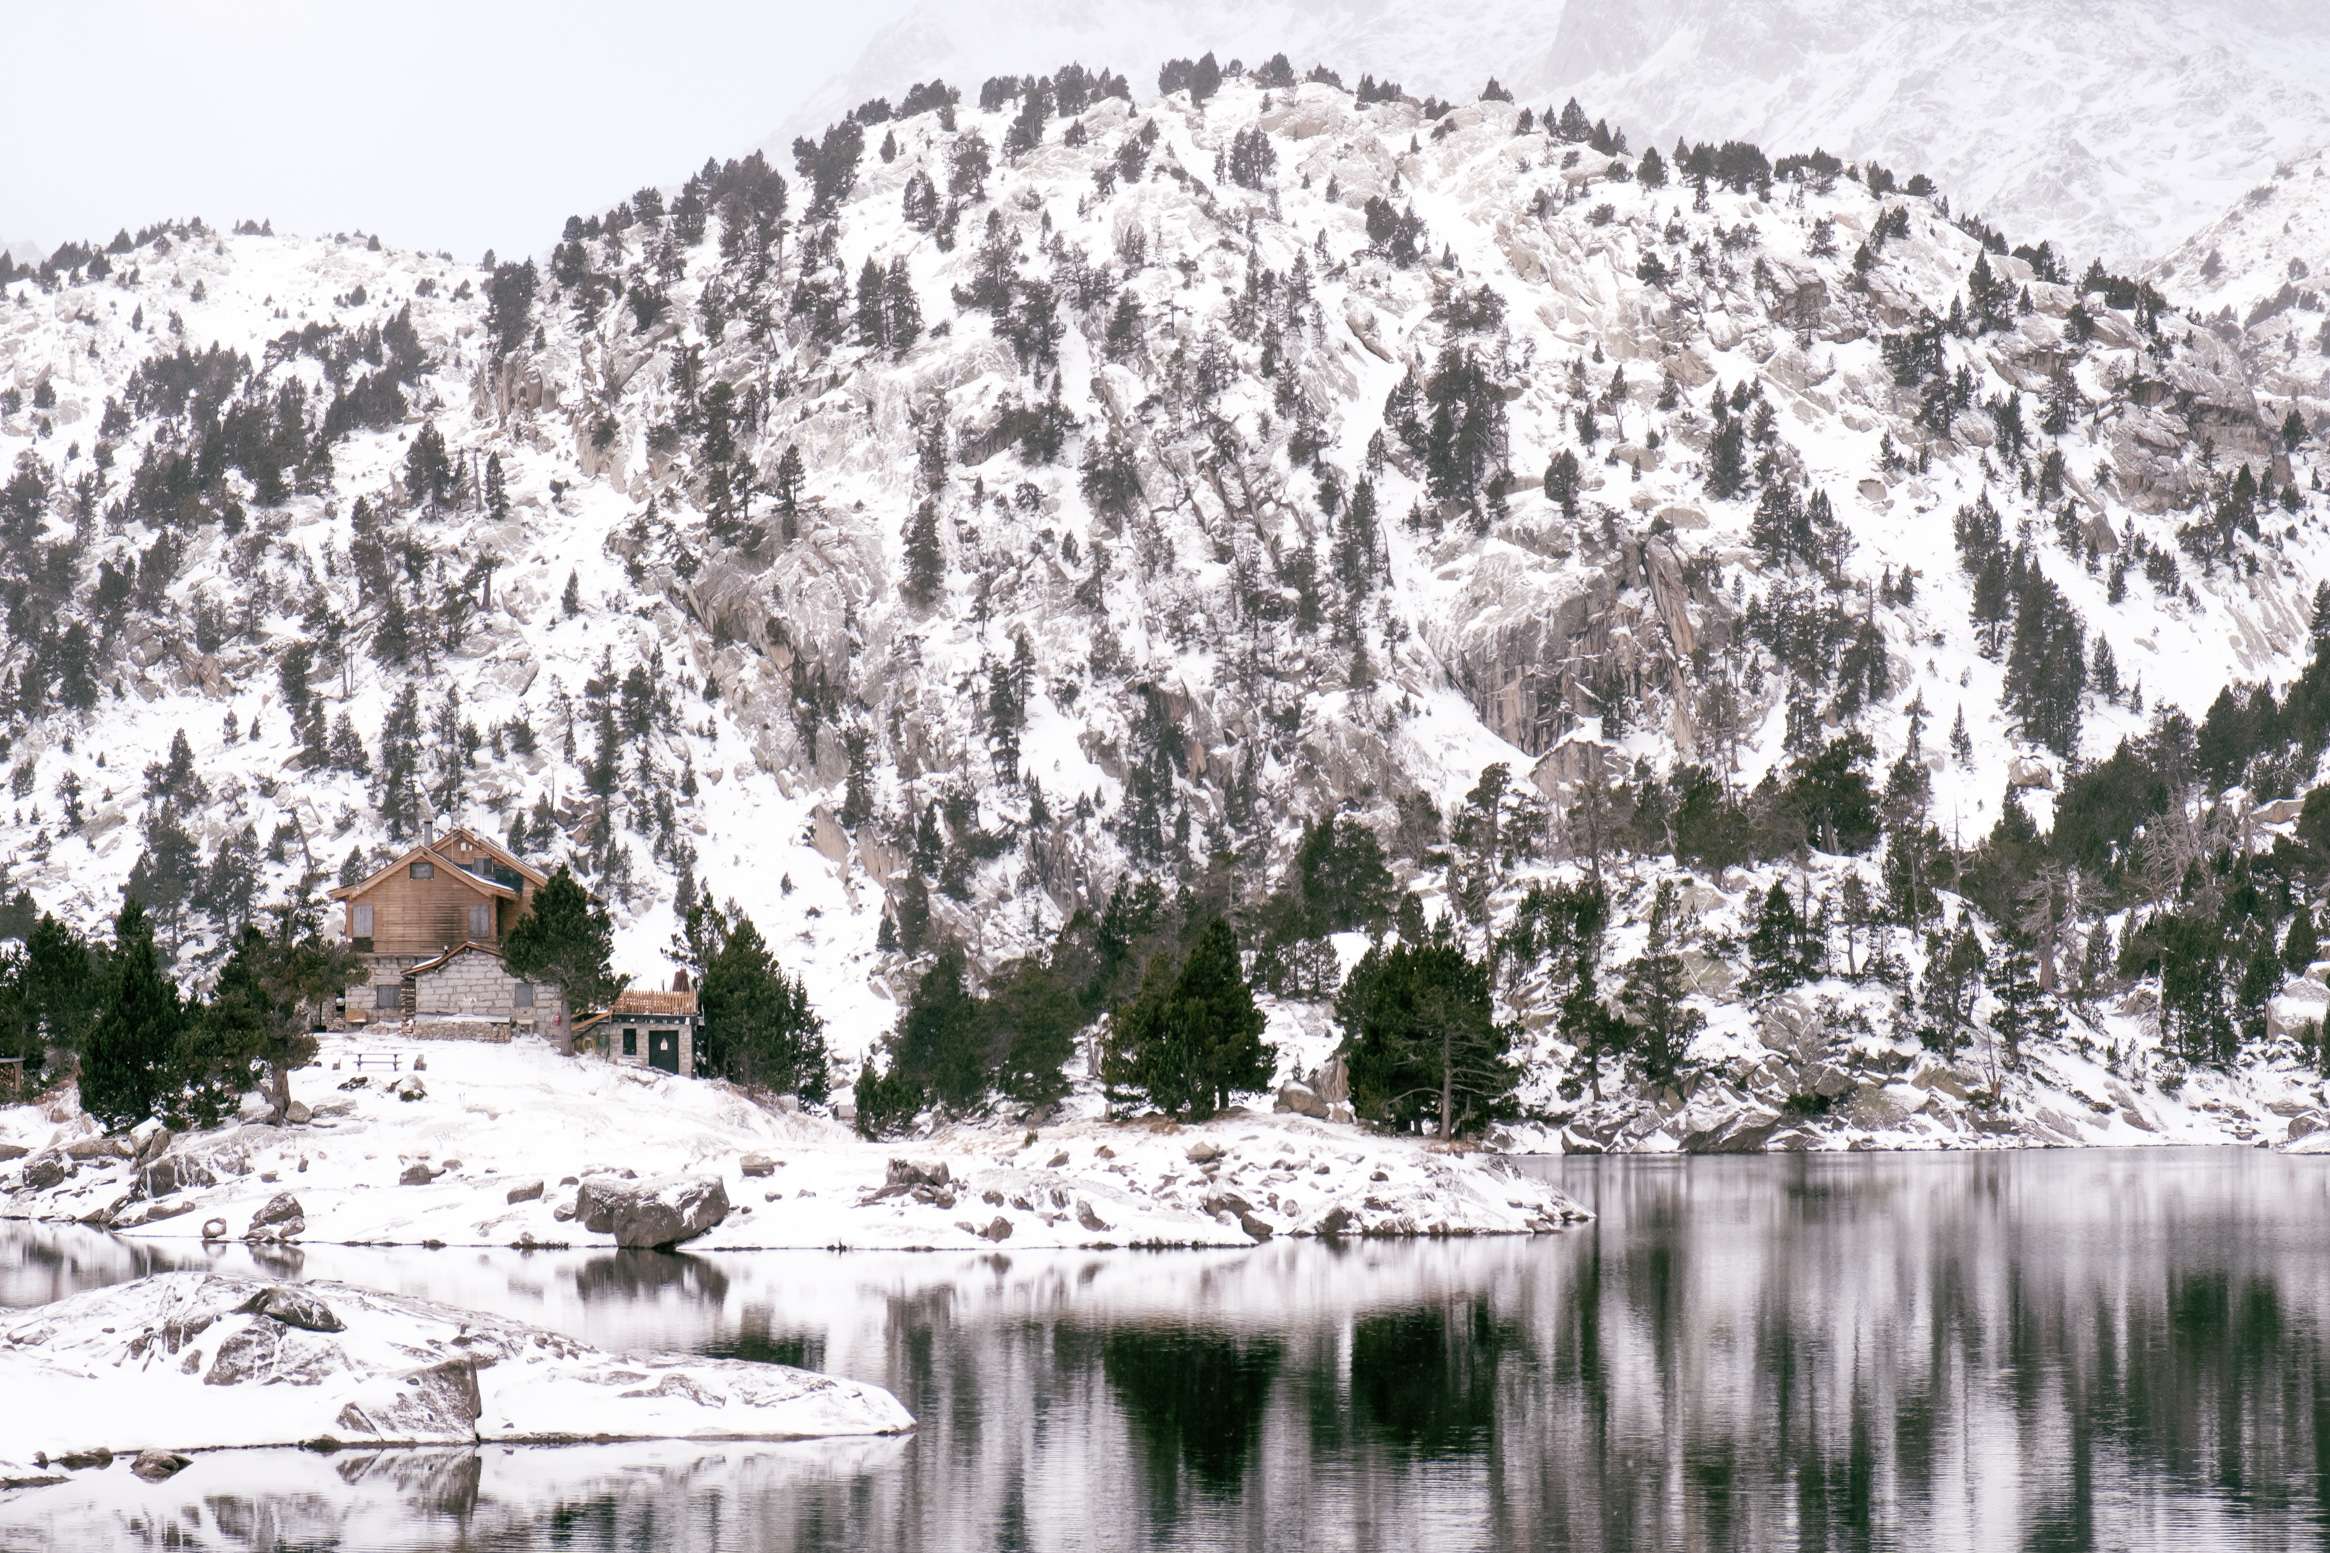 Refugi Josep Maria Blanc at lake Trullo with snowy mountains in the background